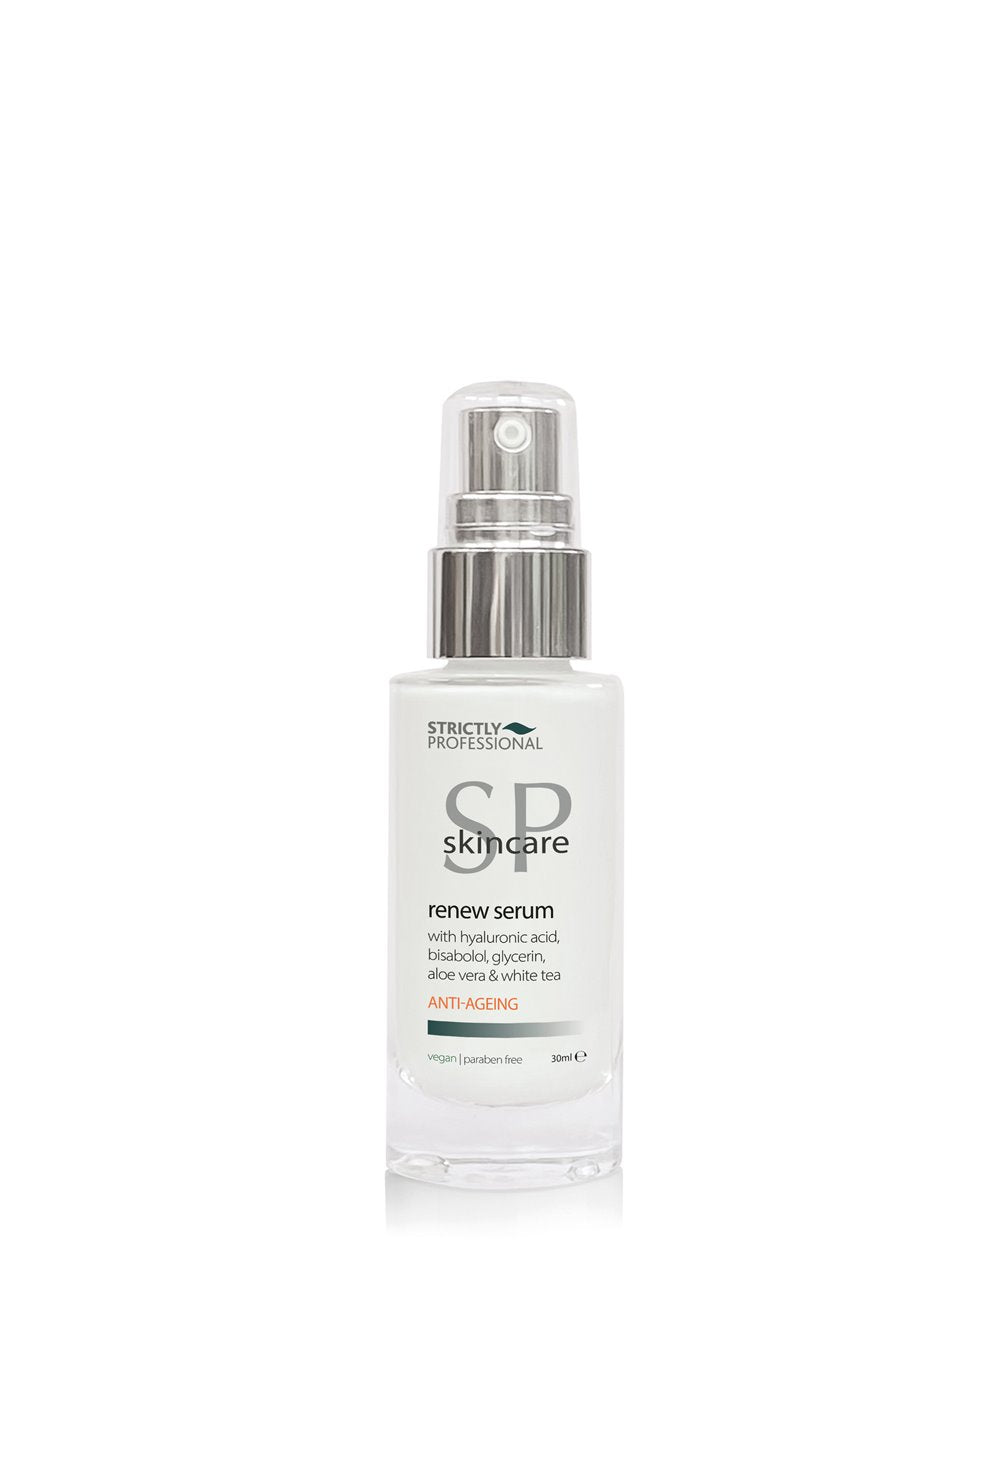 Strictly Professional SP Skincare Anti-Ageing Treatment Range